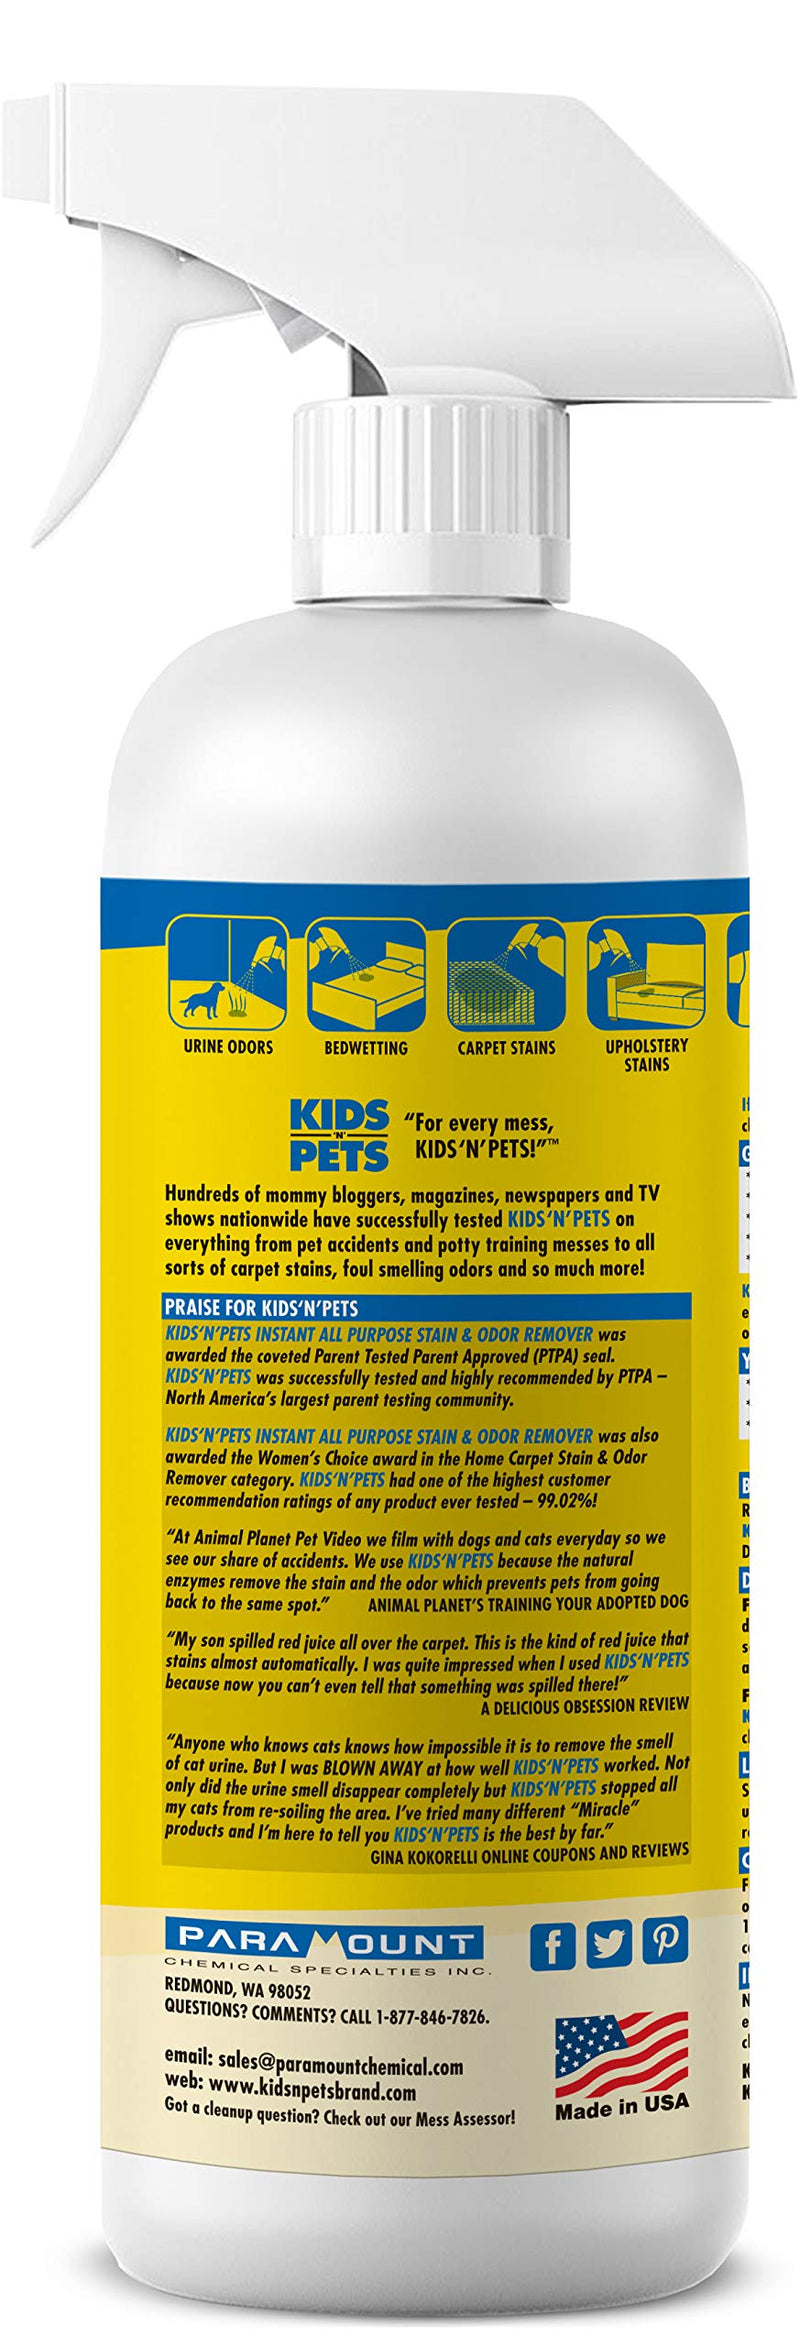 [Australia] - KIDS 'N' PETS Instant All-purpose Stain & Odor Remover – 27.05 oz. - (800 ml) | Proprietary Formula Permanently Eliminates Tough Stains & Odors – Even Urine Odors | Non-Toxic & Child Safe 1 